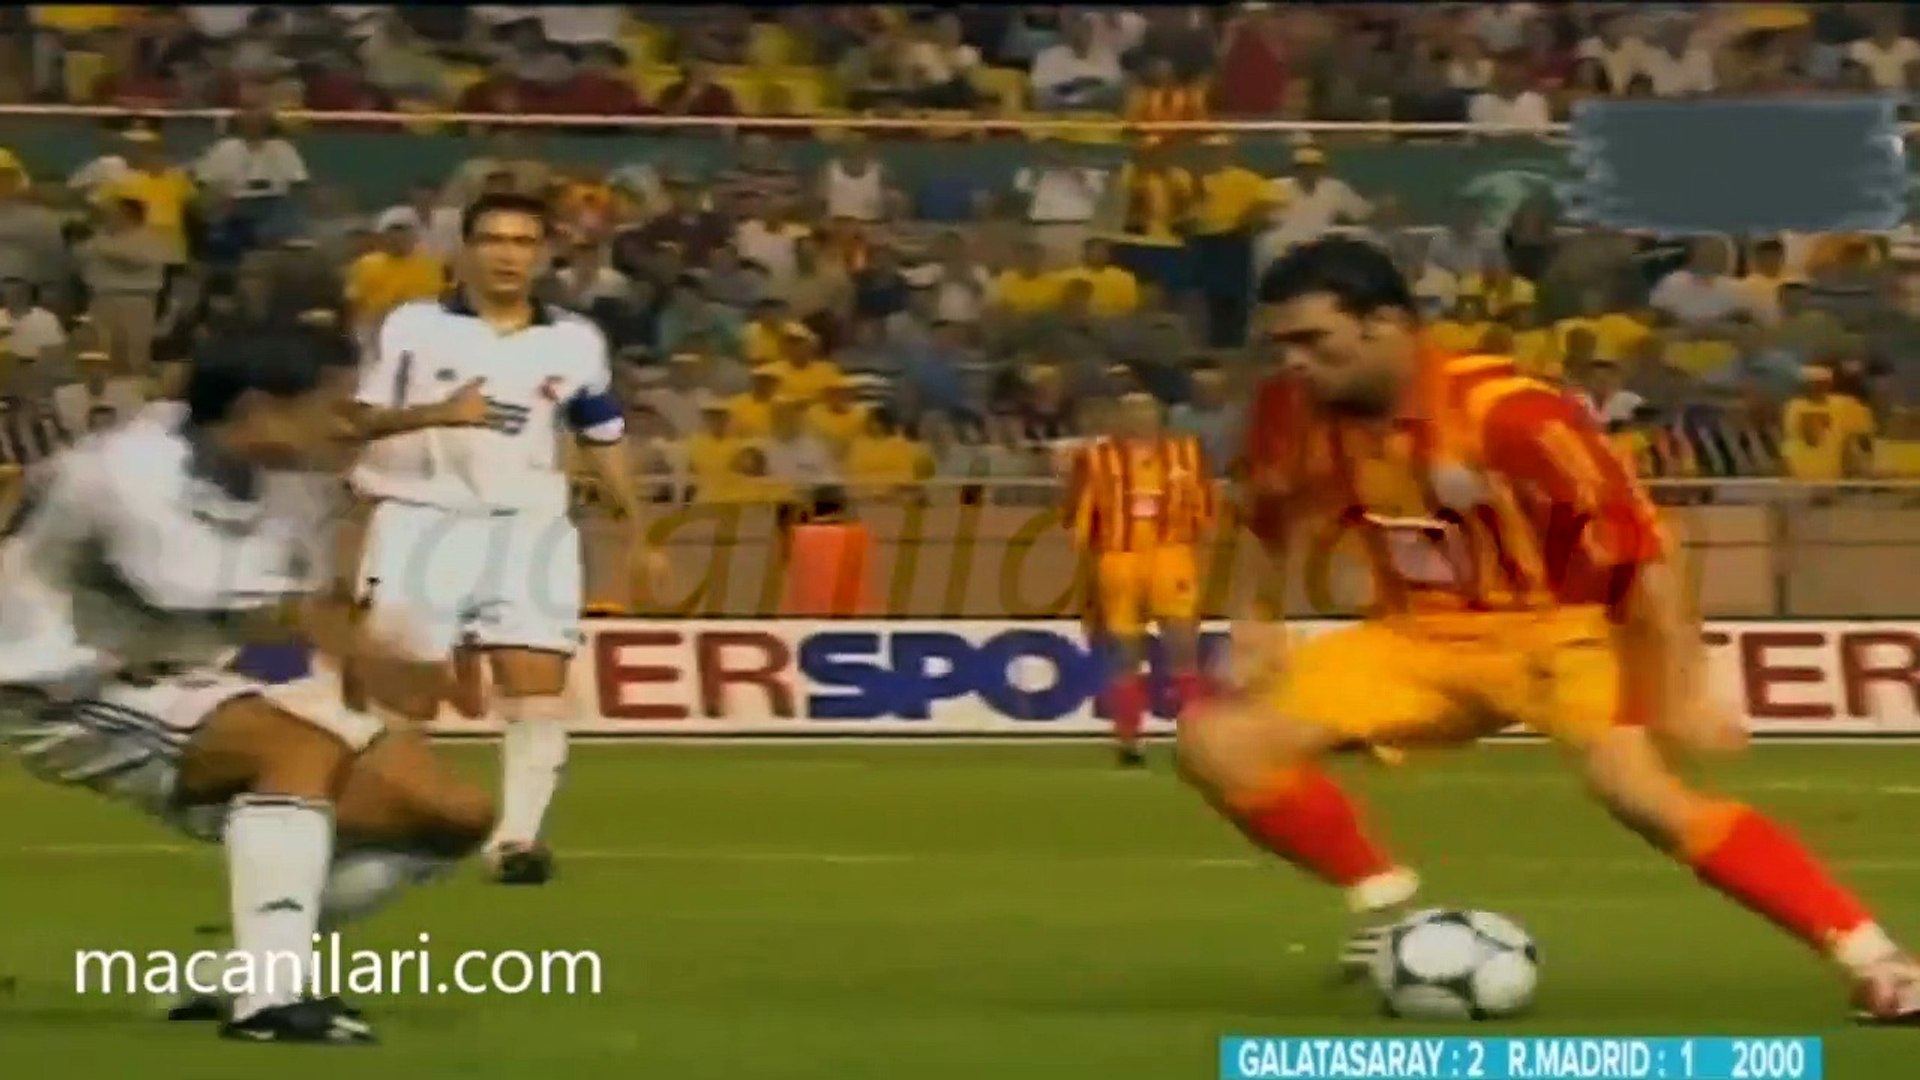 Galatasaray 2-1 Real Madrid (With Golden Goal) [HD] 25.08.2000 - 2000 UEFA  Super Cup Final Match - Dailymotion Video